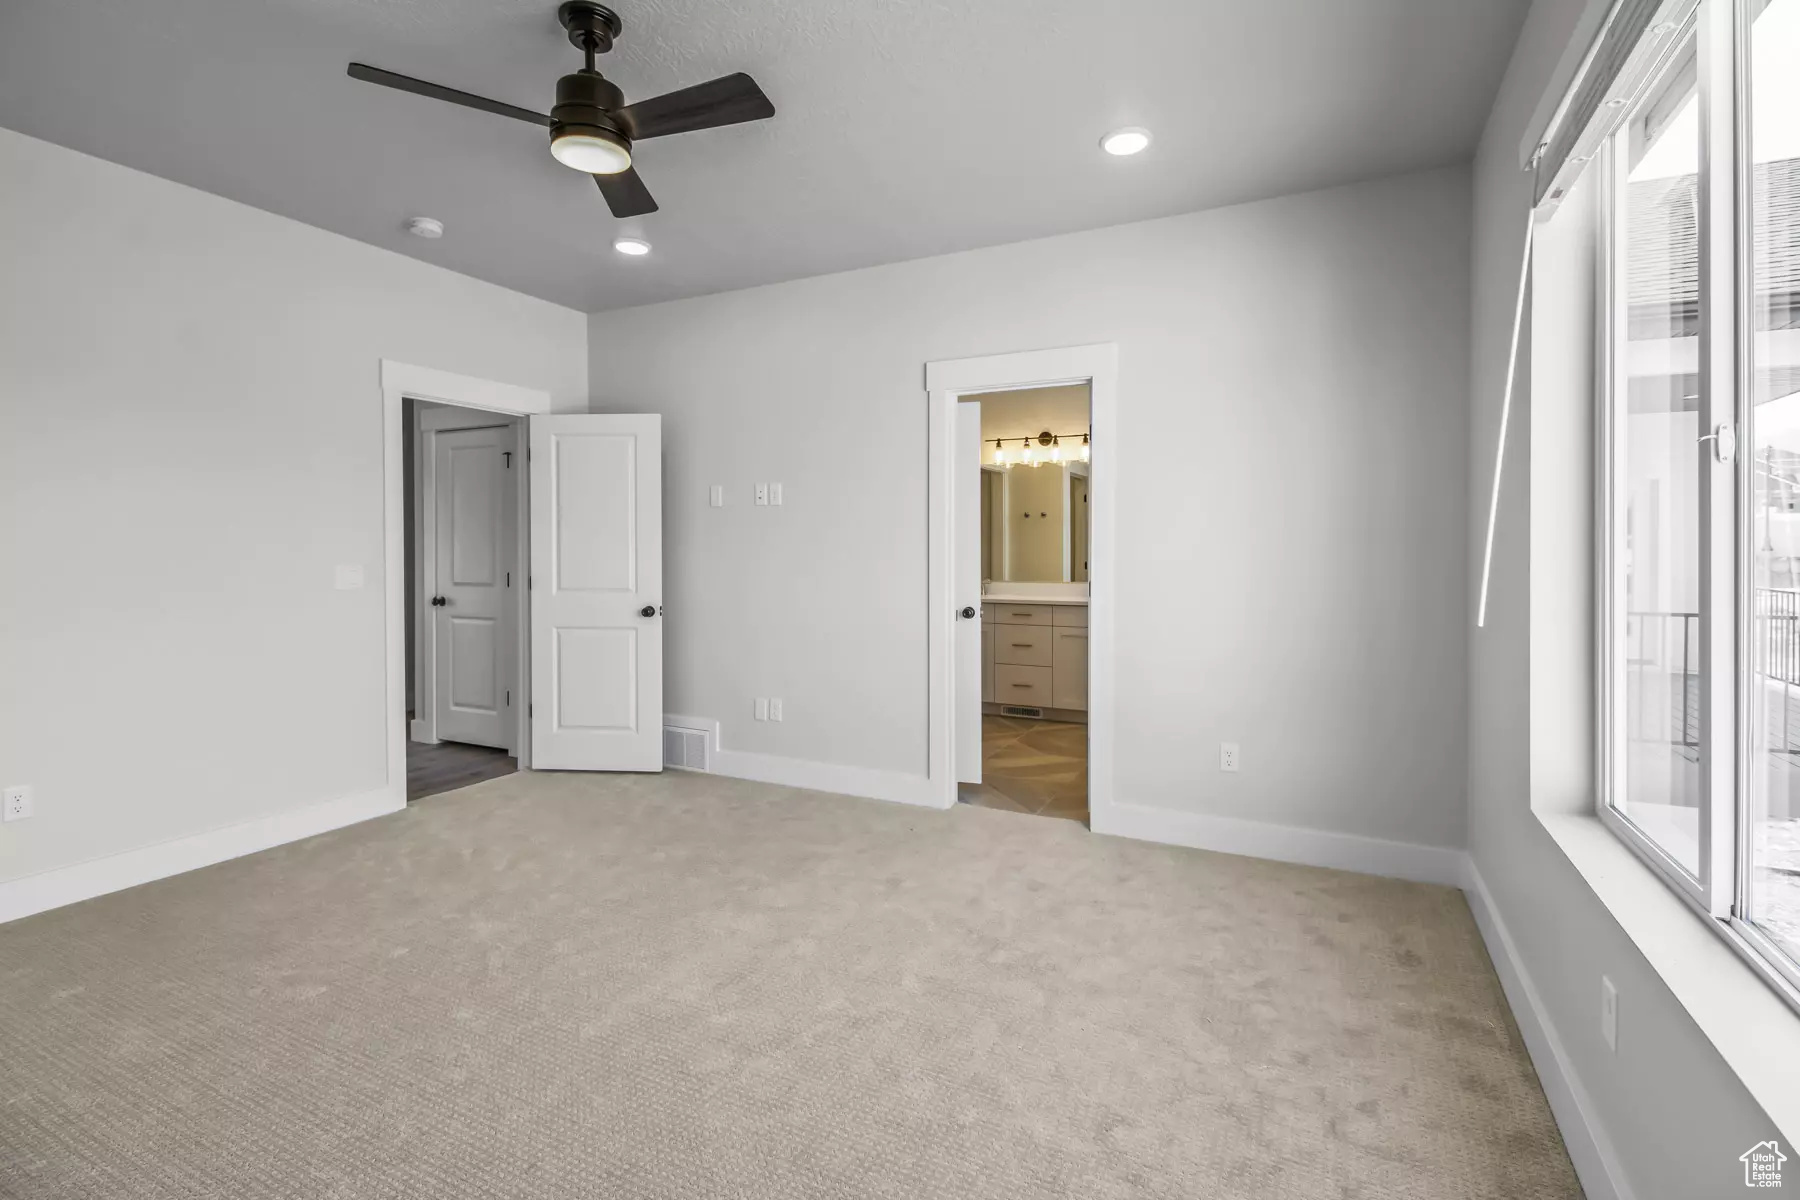 Unfurnished bedroom with light carpet, connected bathroom, and ceiling fan